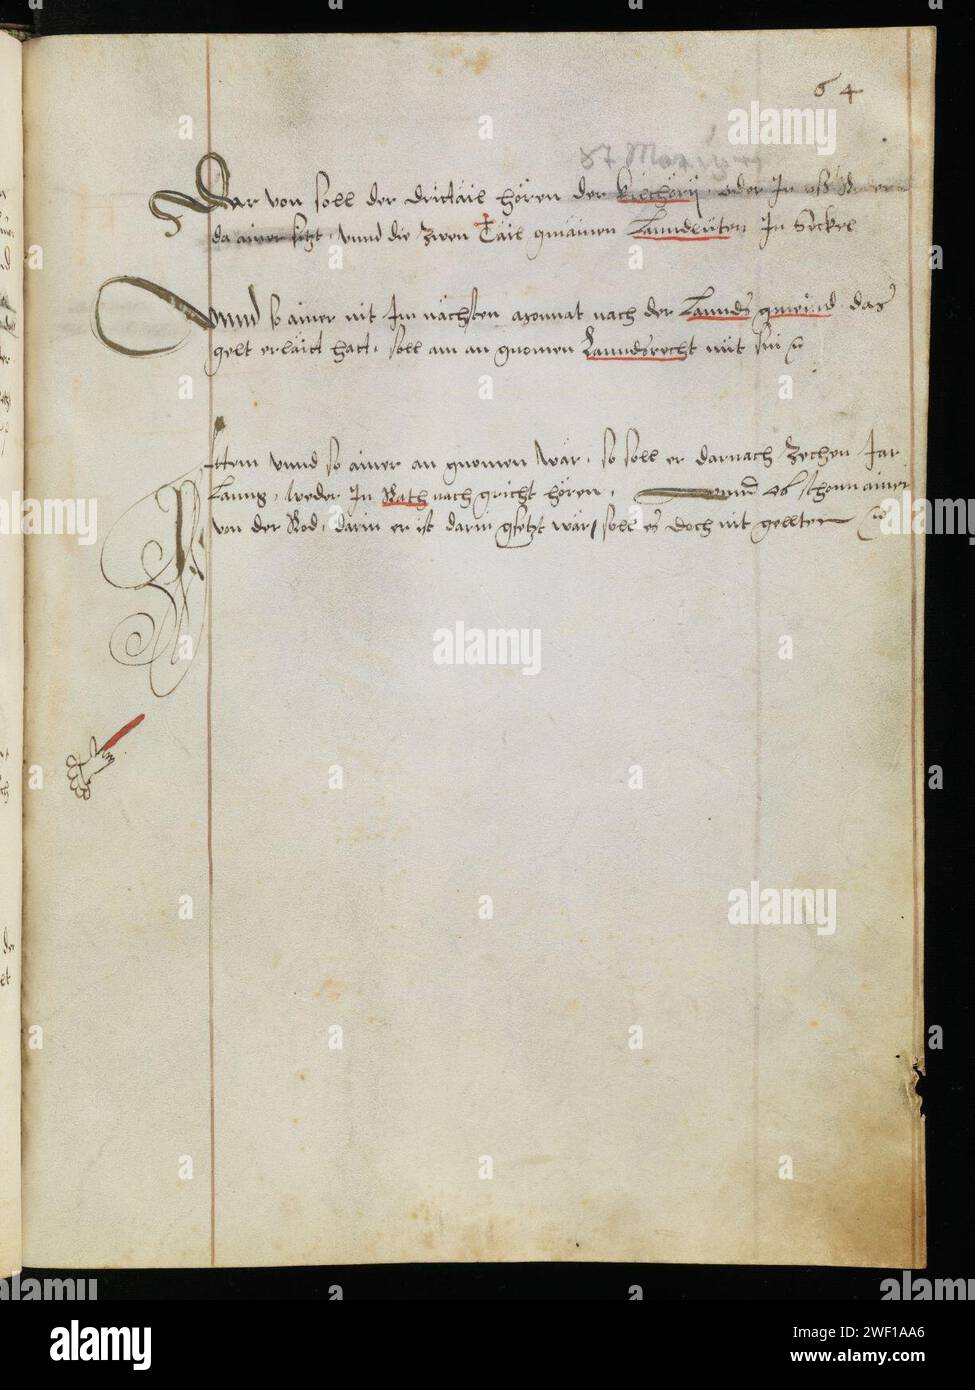 Appenzell, Landesarchiv Appenzell Innerrhoden, E.10.02.01.01, f. 64r – Silver Book of the Land. Stock Photo